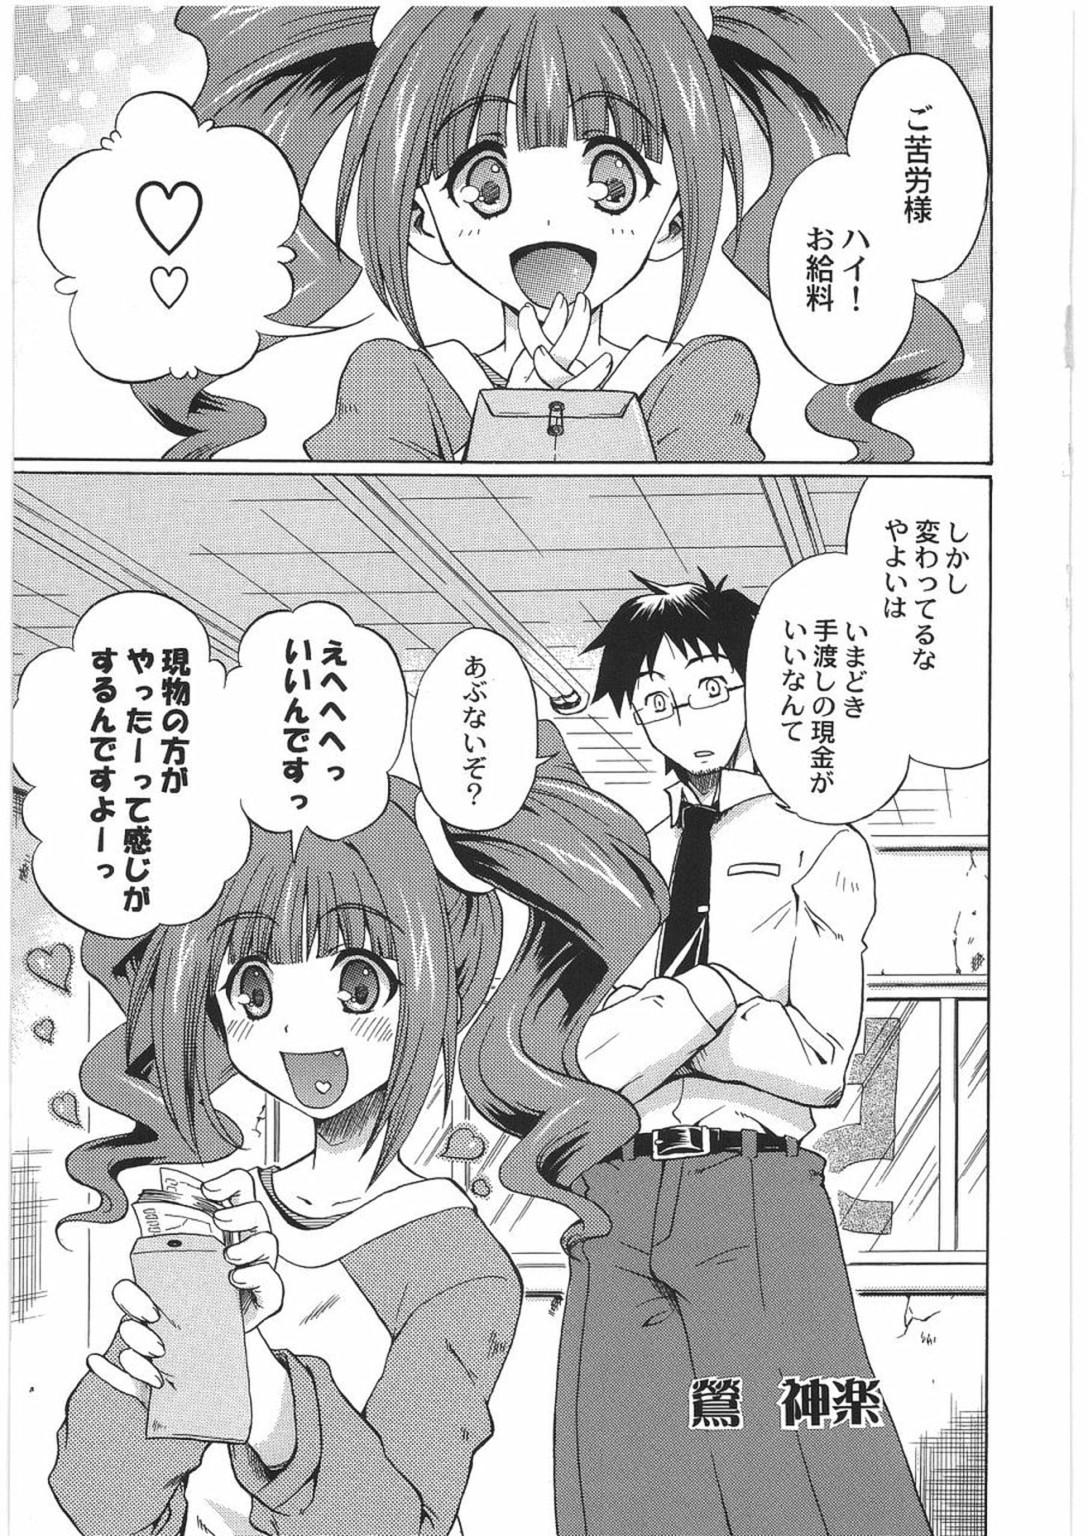 Man THE IDOLM@STER HEX STRIKE - The idolmaster Grandmother - Page 4